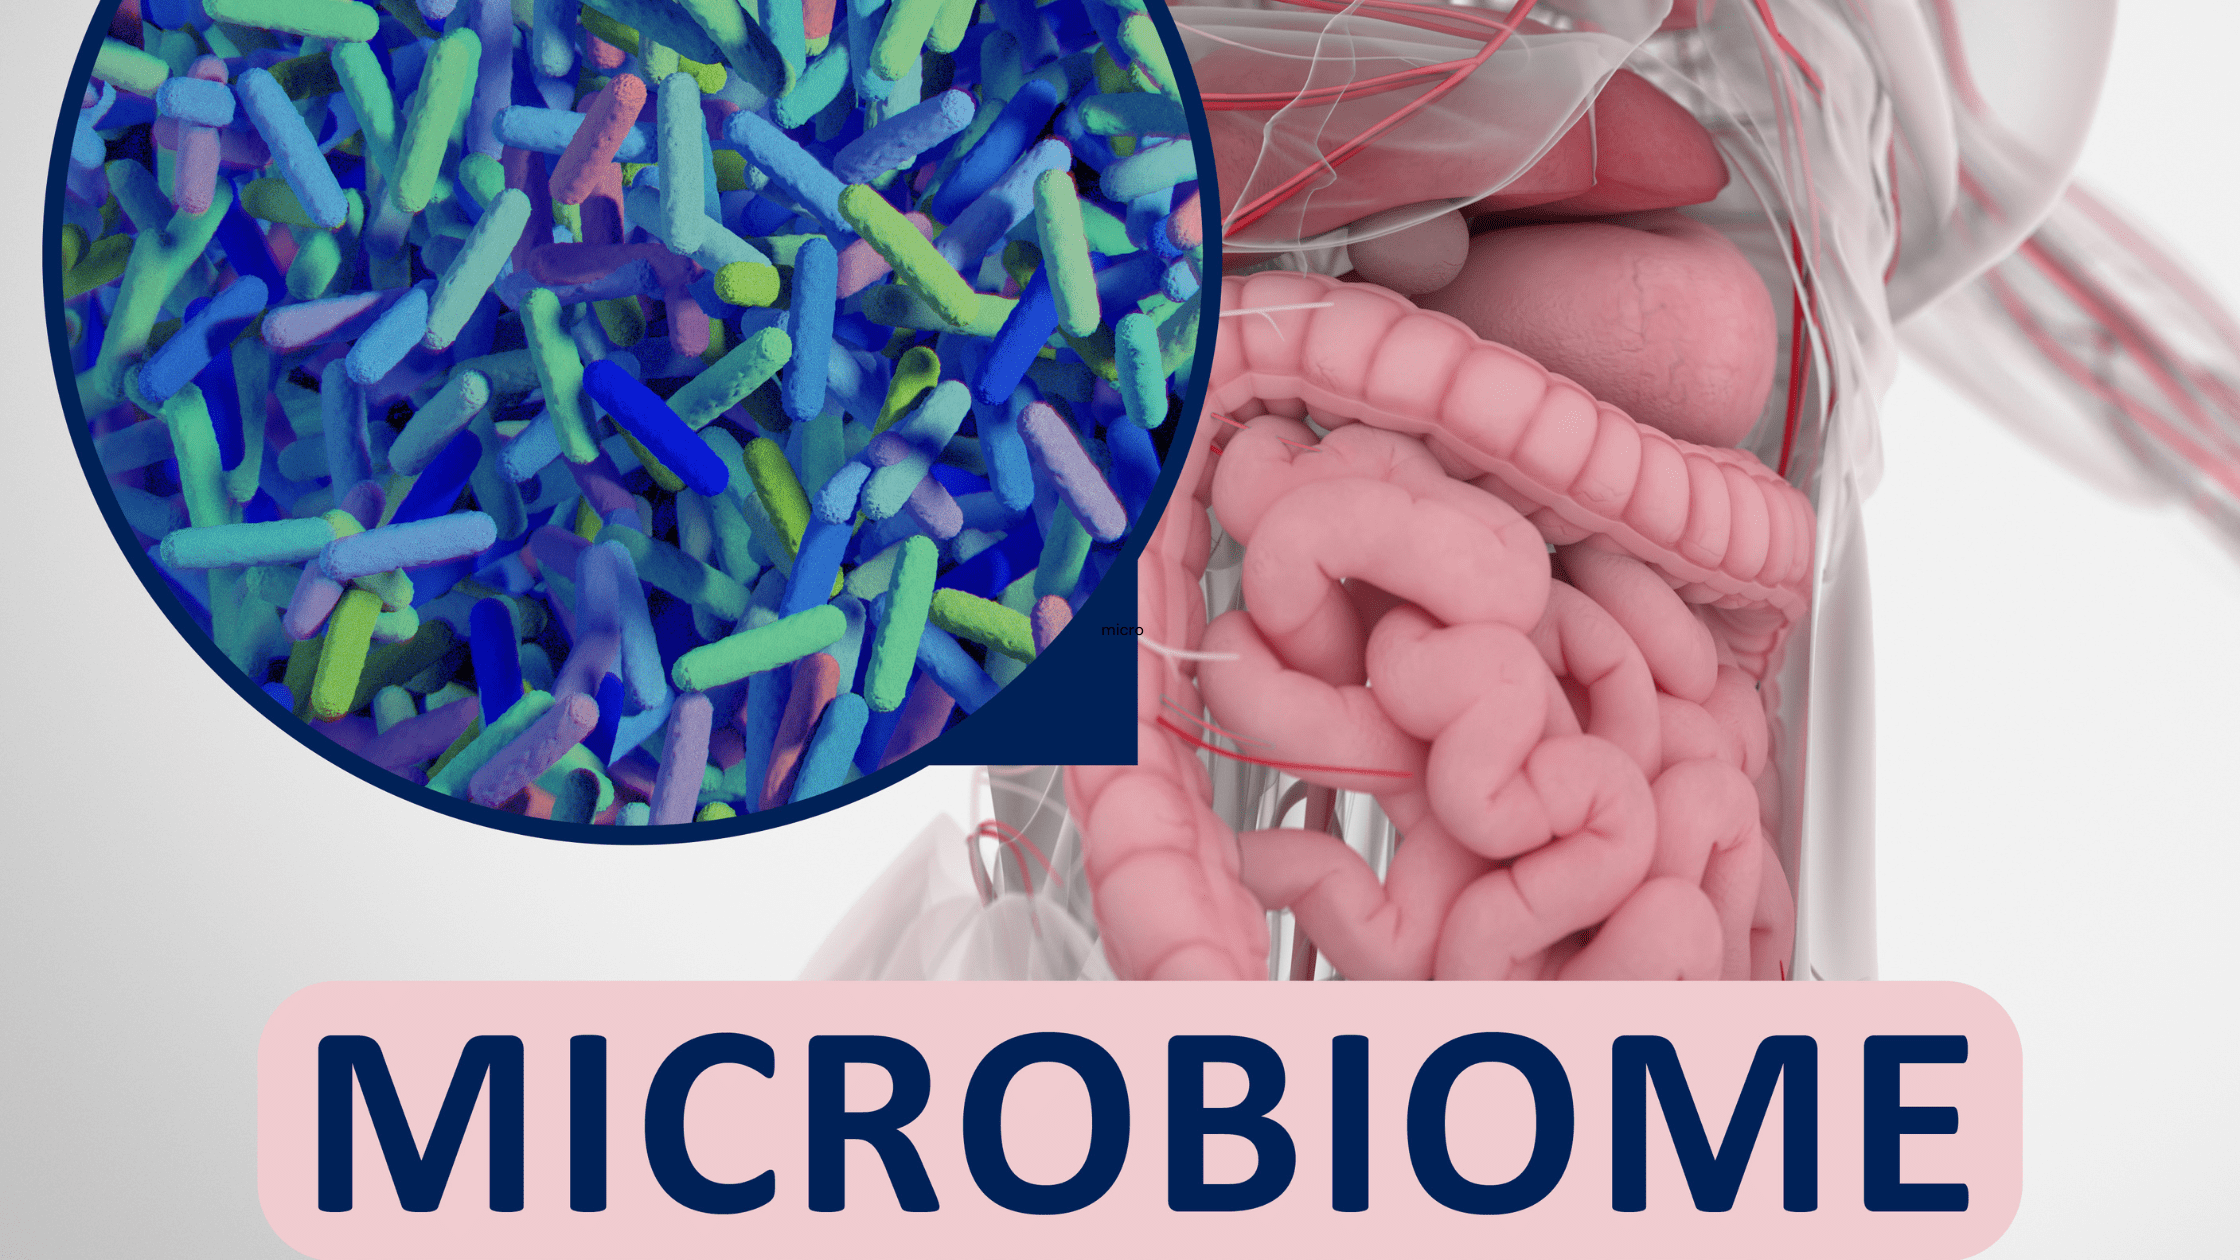 human body with intestines showing and a zoomed in version of the gut microbiome